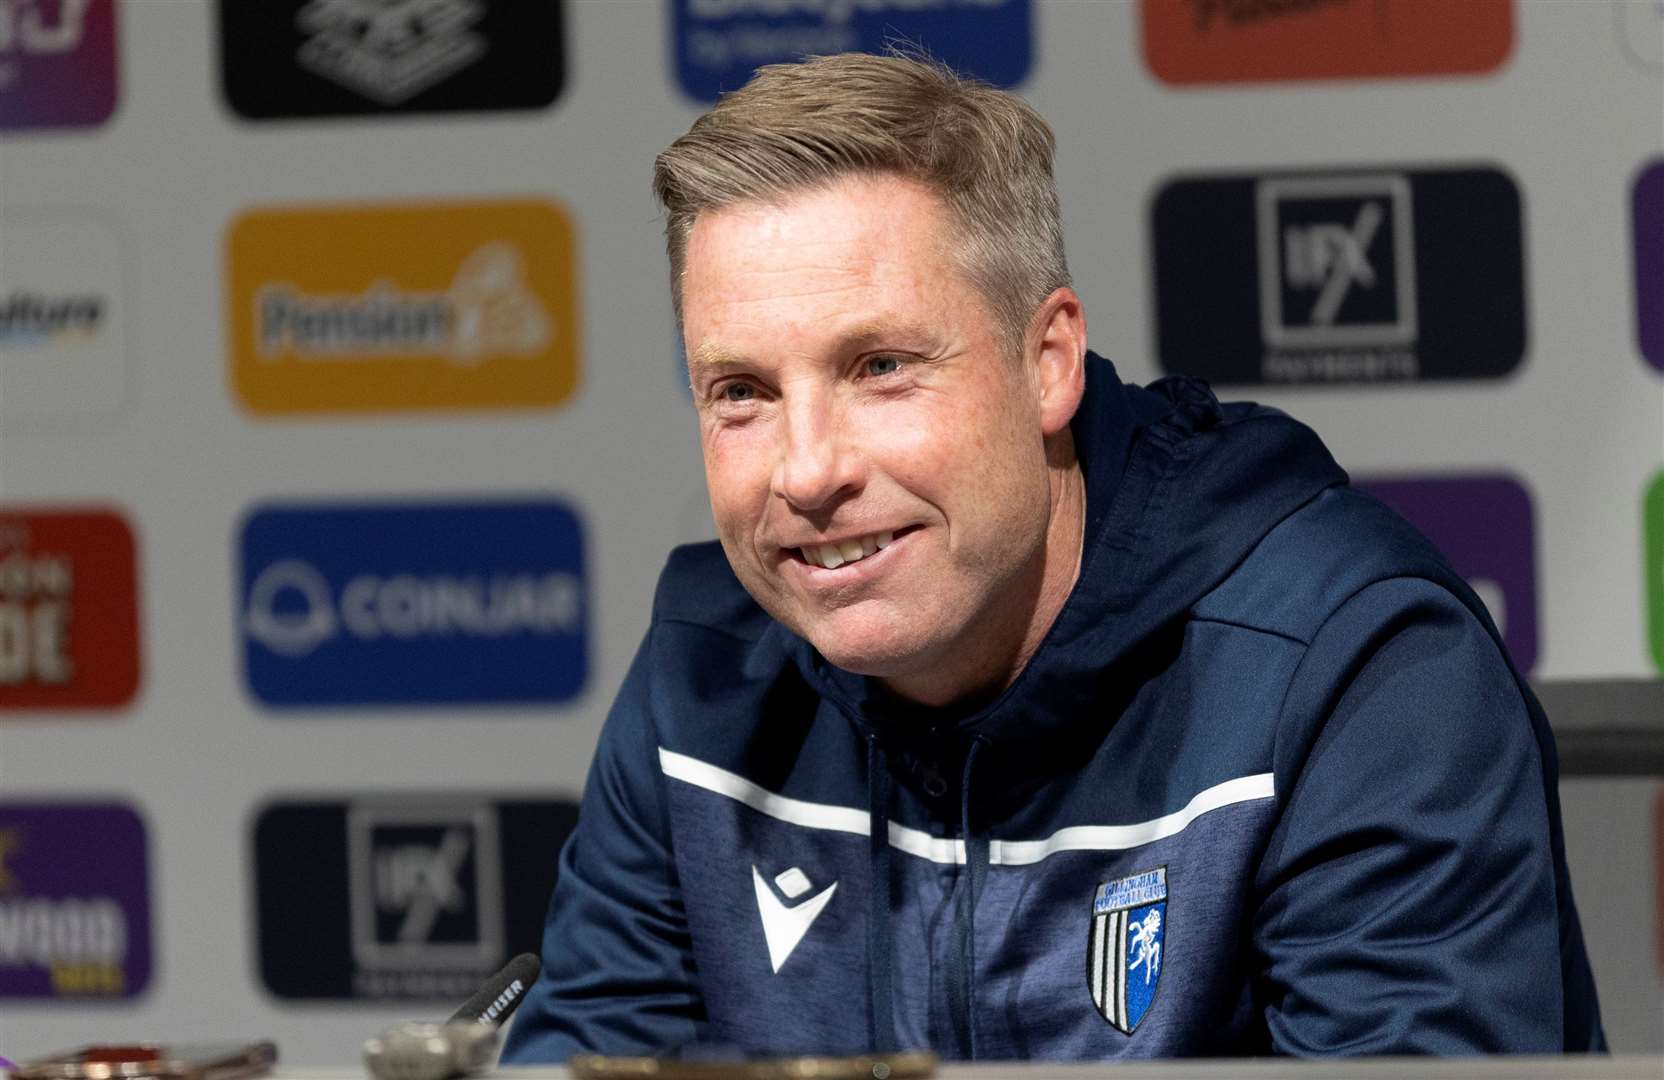 Neil Harris enjoyed some good wins in charge - notably in the Carabao Cup. He was all smiles after knocking out Brentford in November 2022. Picture: KPI